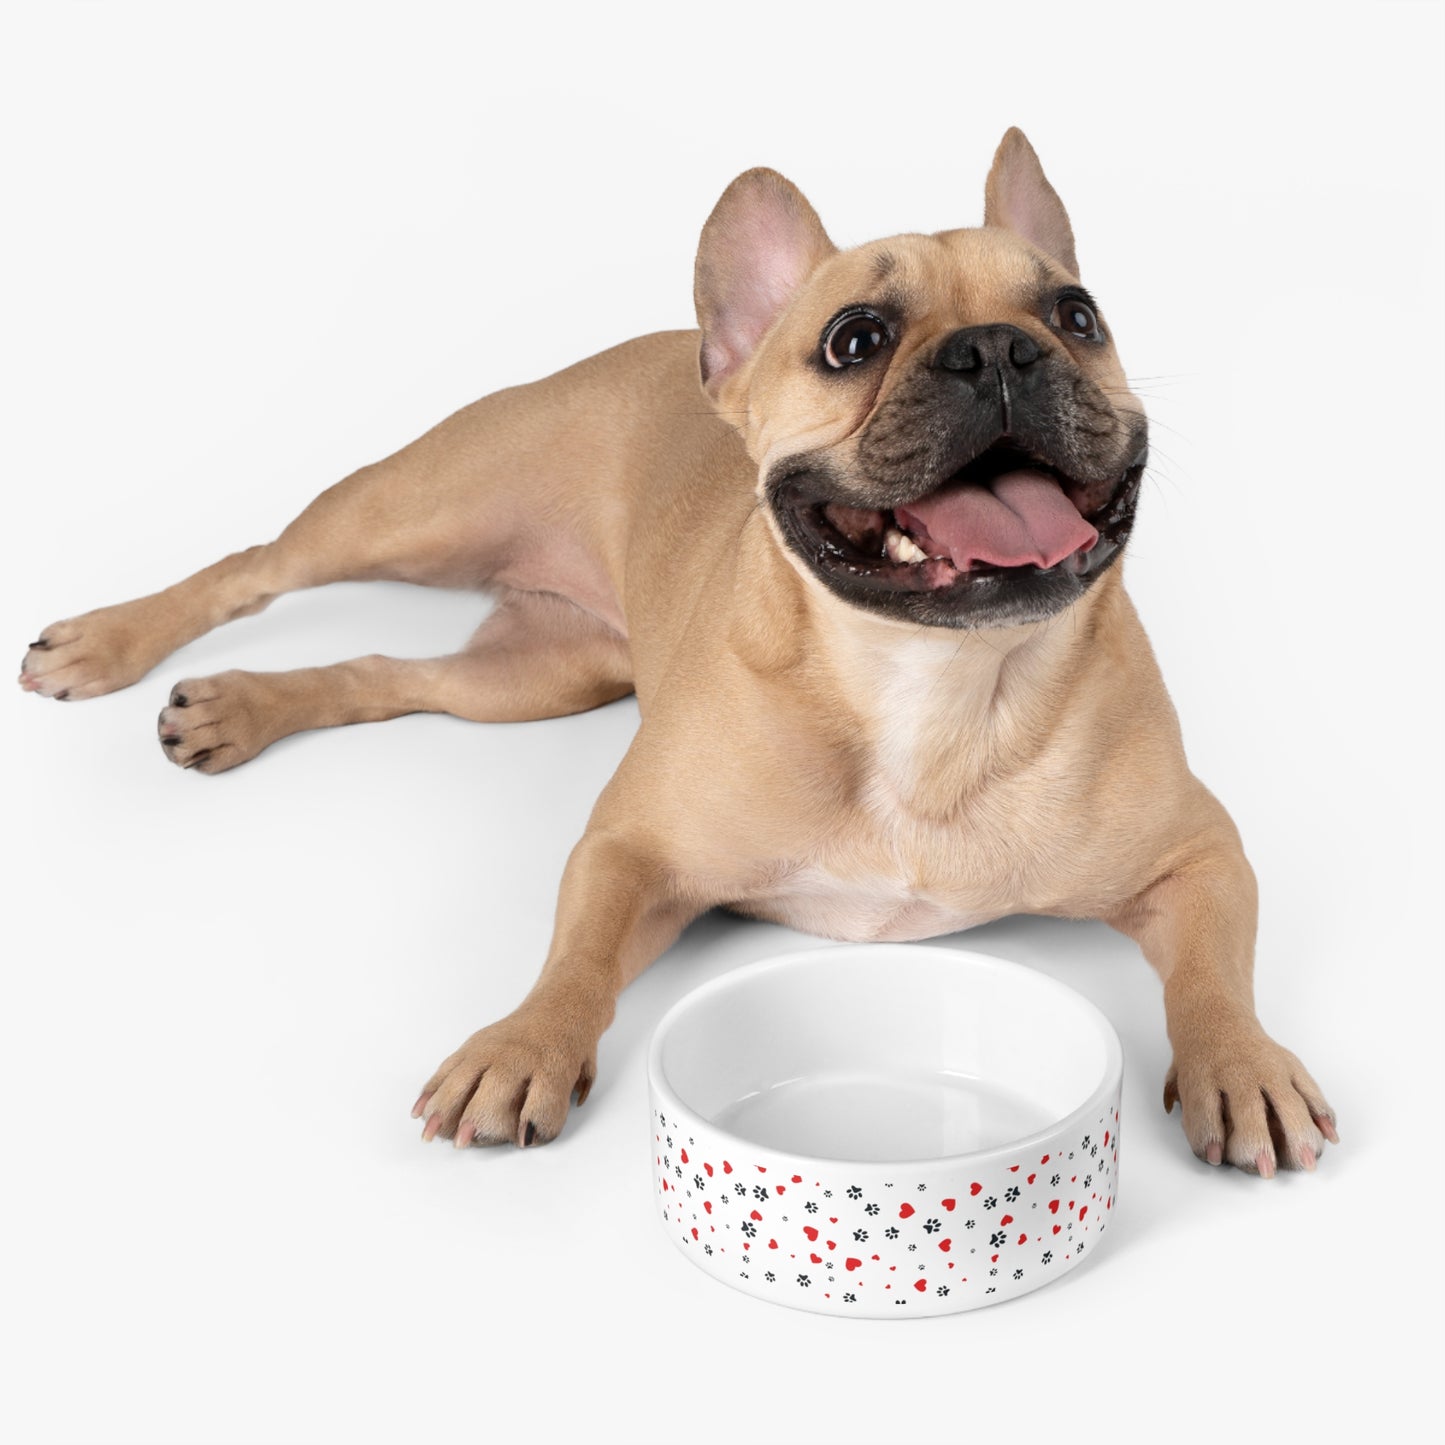 Niccie's Paws and Hearts Pet Bowl: Stylish, Durable, and Functional